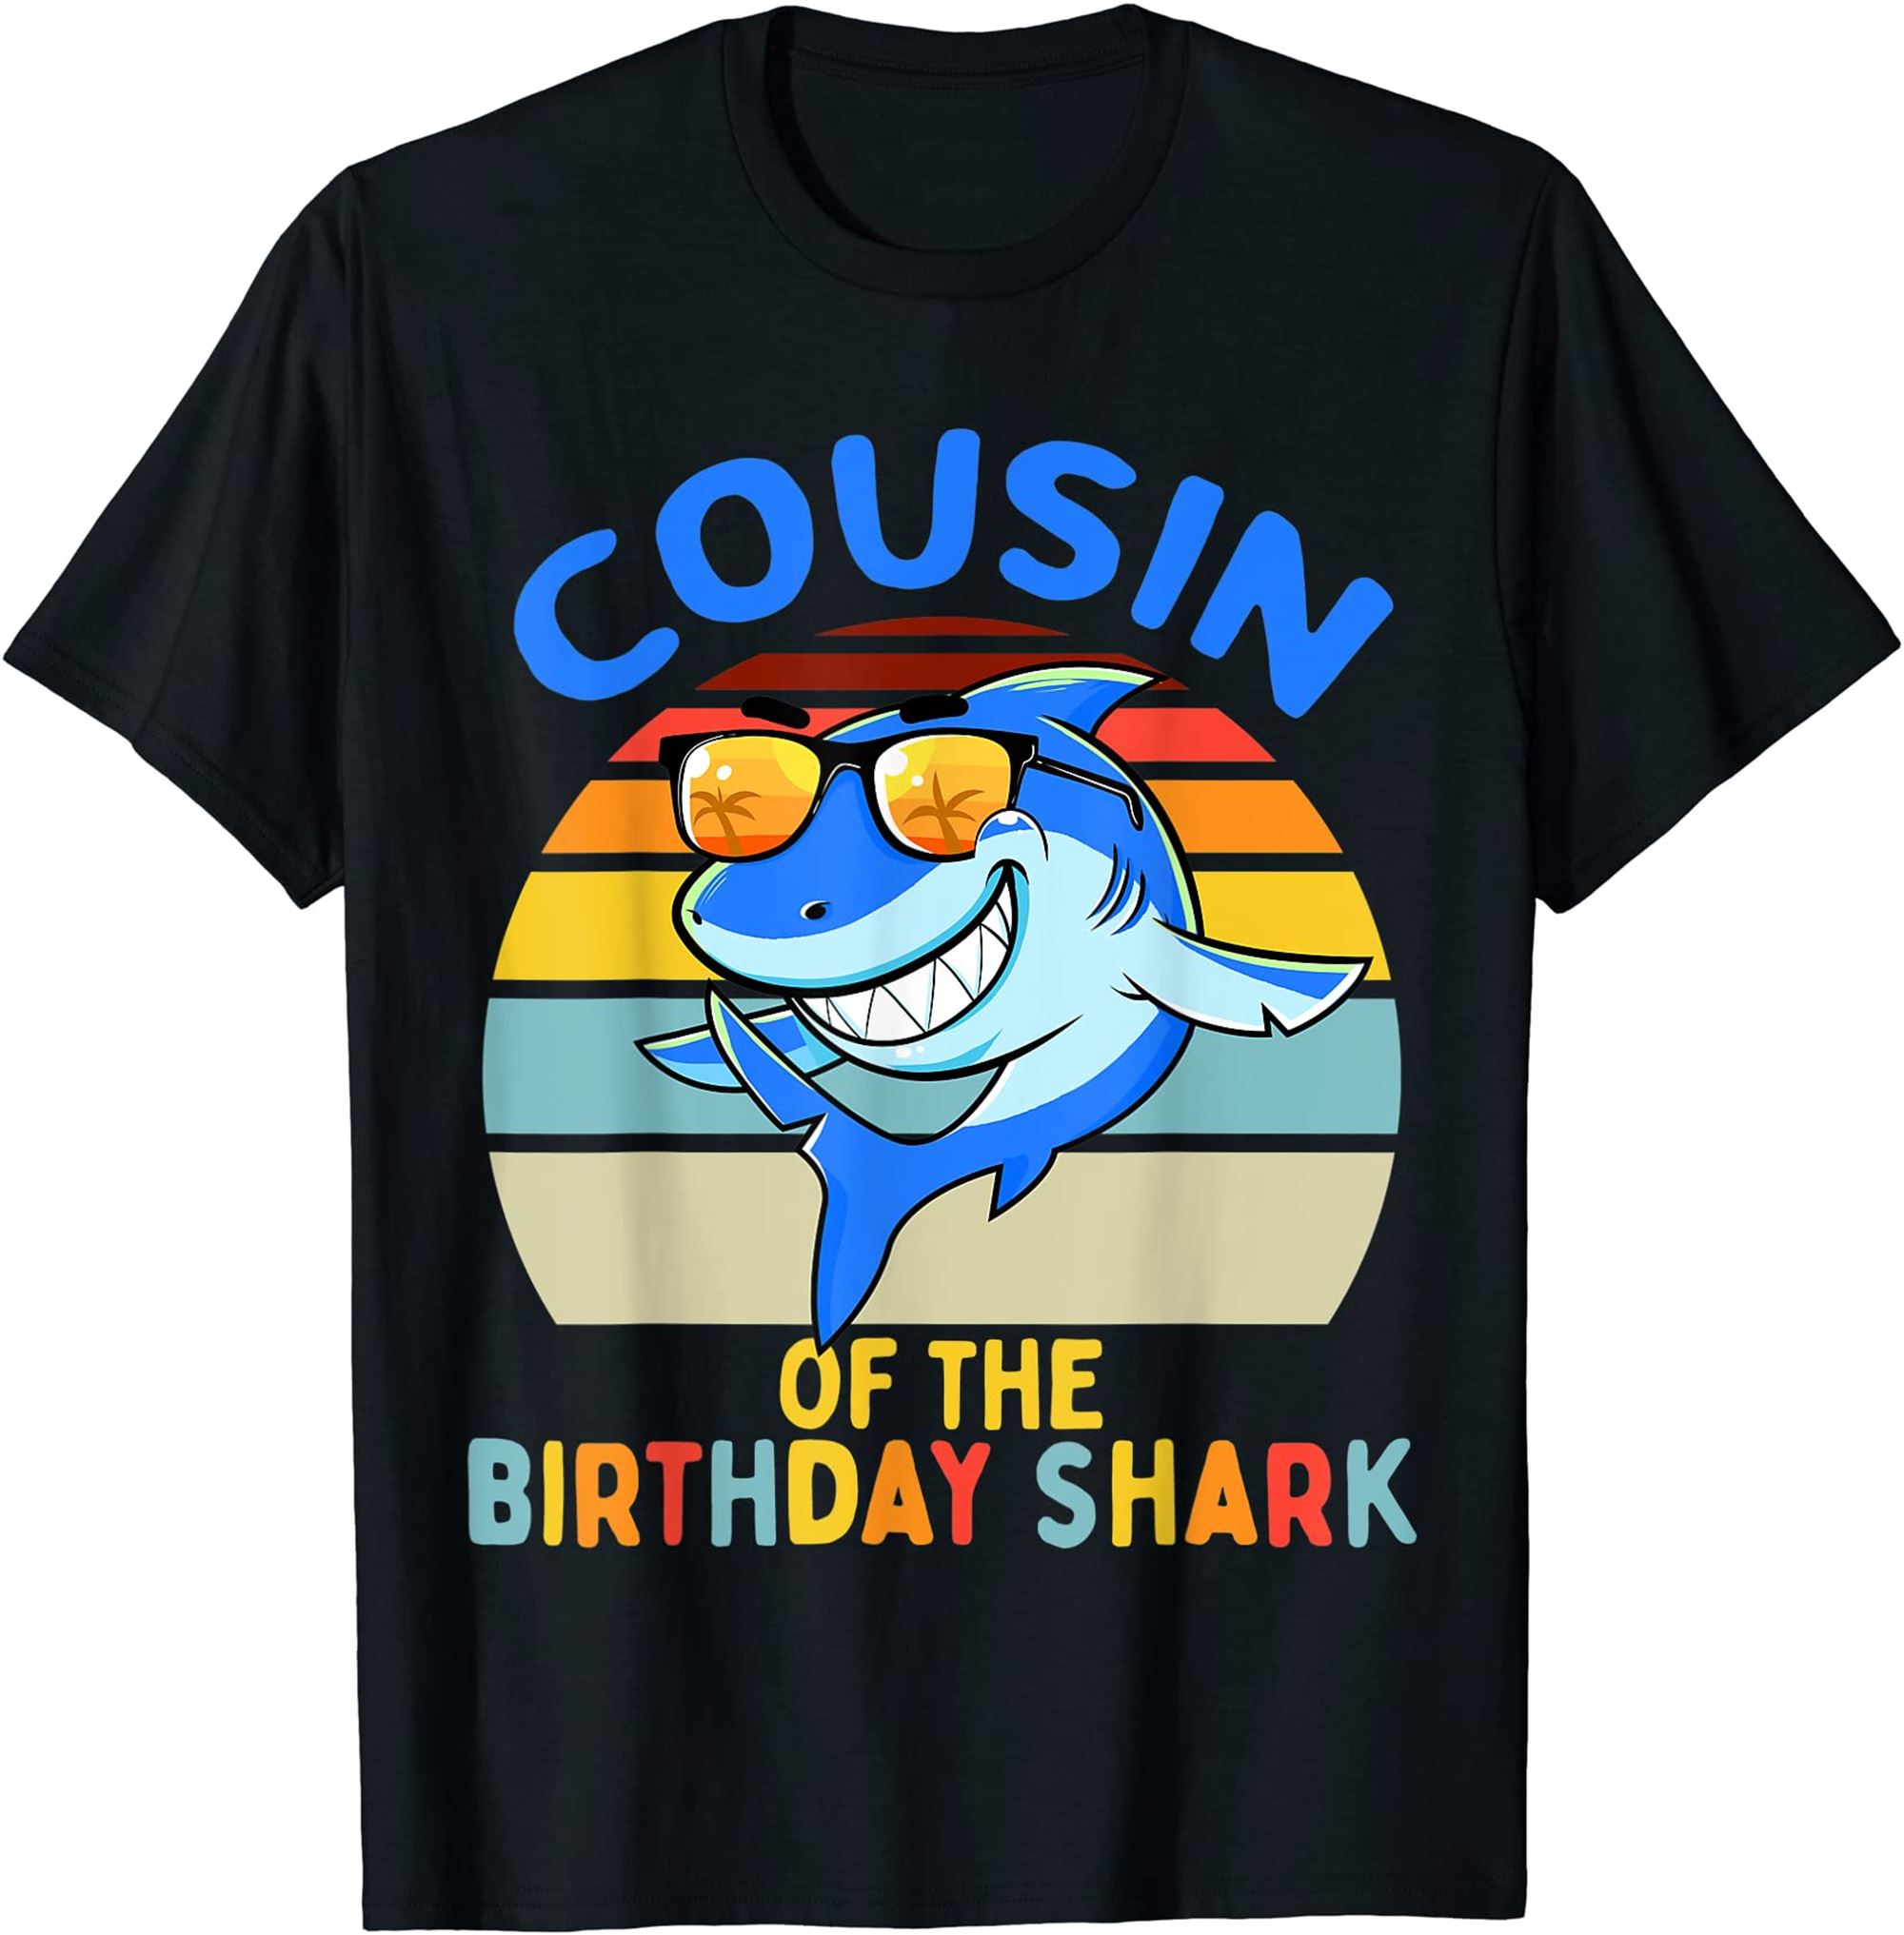 Cousin Of The Shark Birthday Boys Matching Family T-shirt Size Up To 5xl